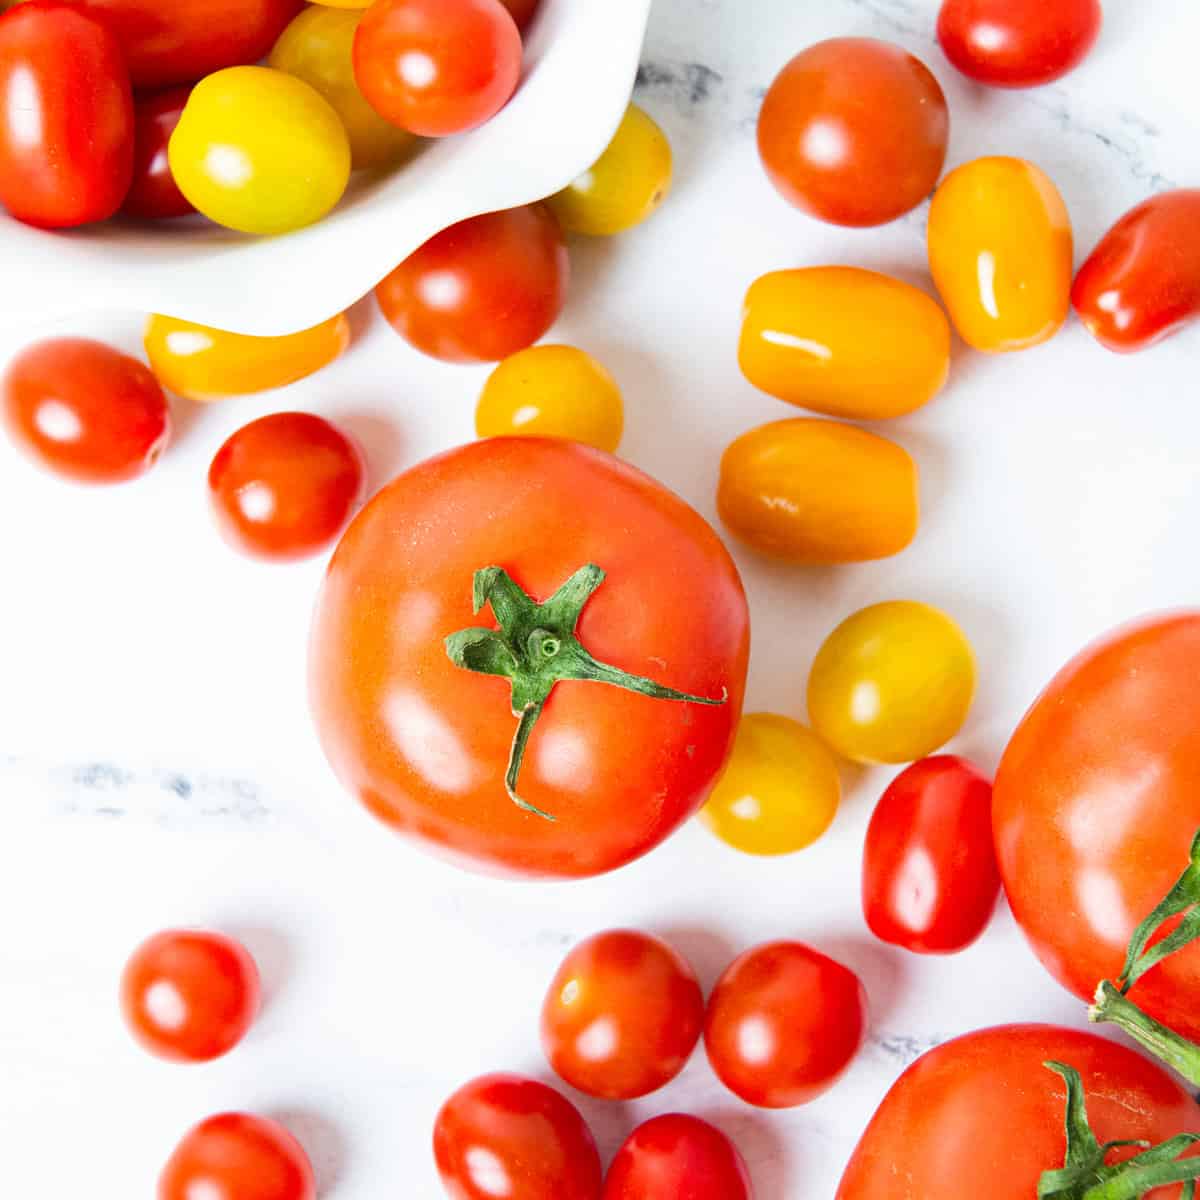 Overhead shot of scattered tomatoes with a few in a white bowl.